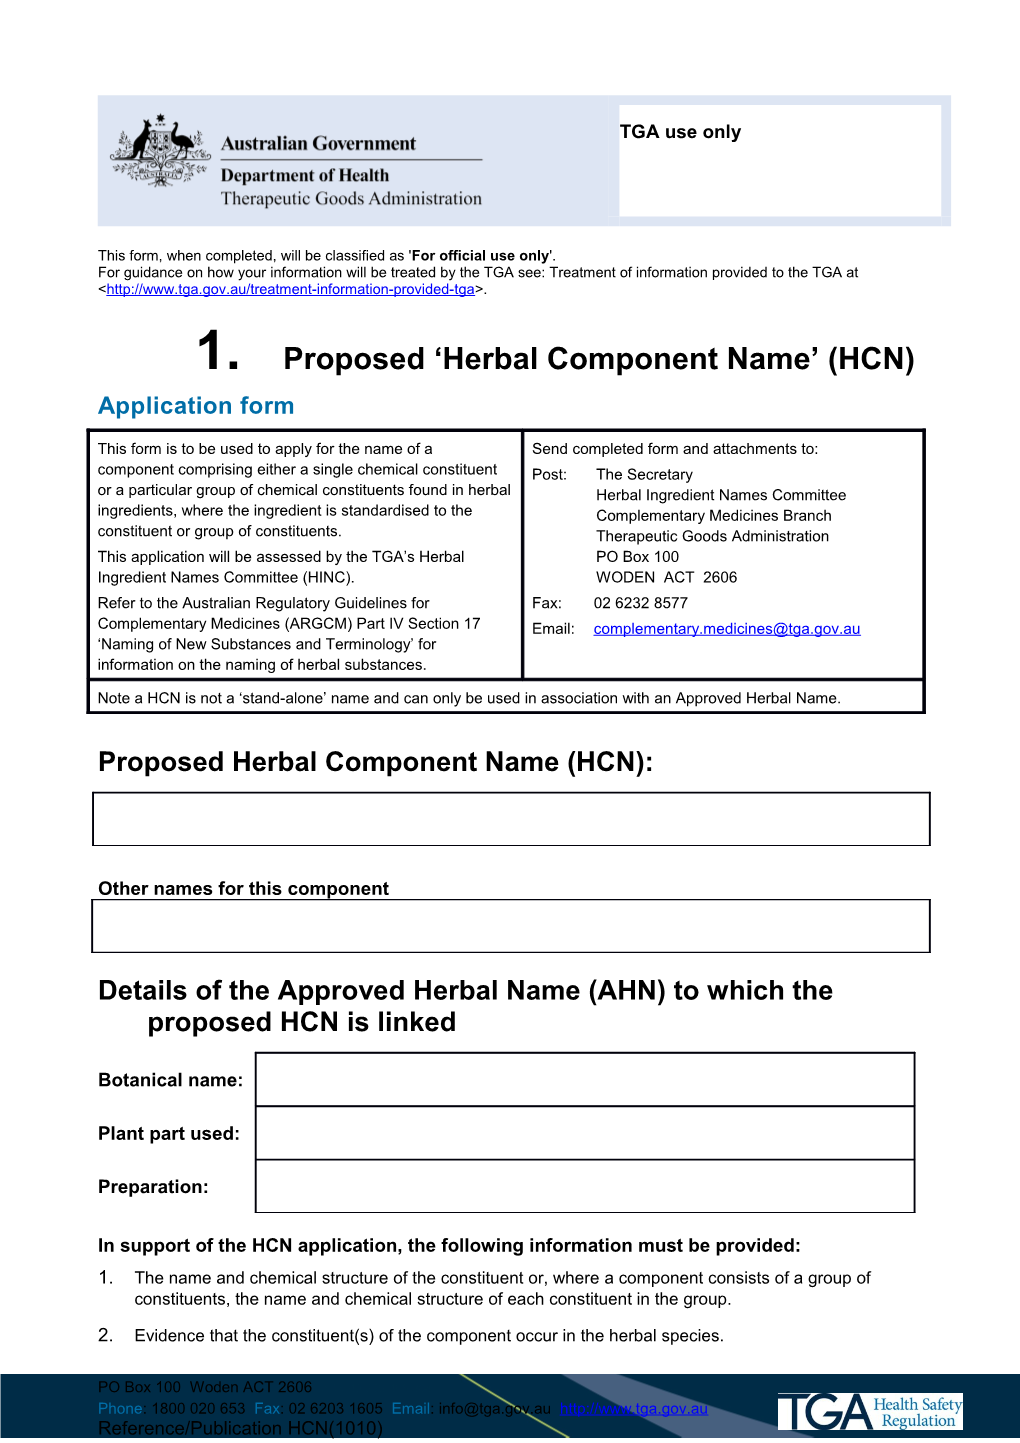 Proposed Herbal Component Name (HCN) Application Form